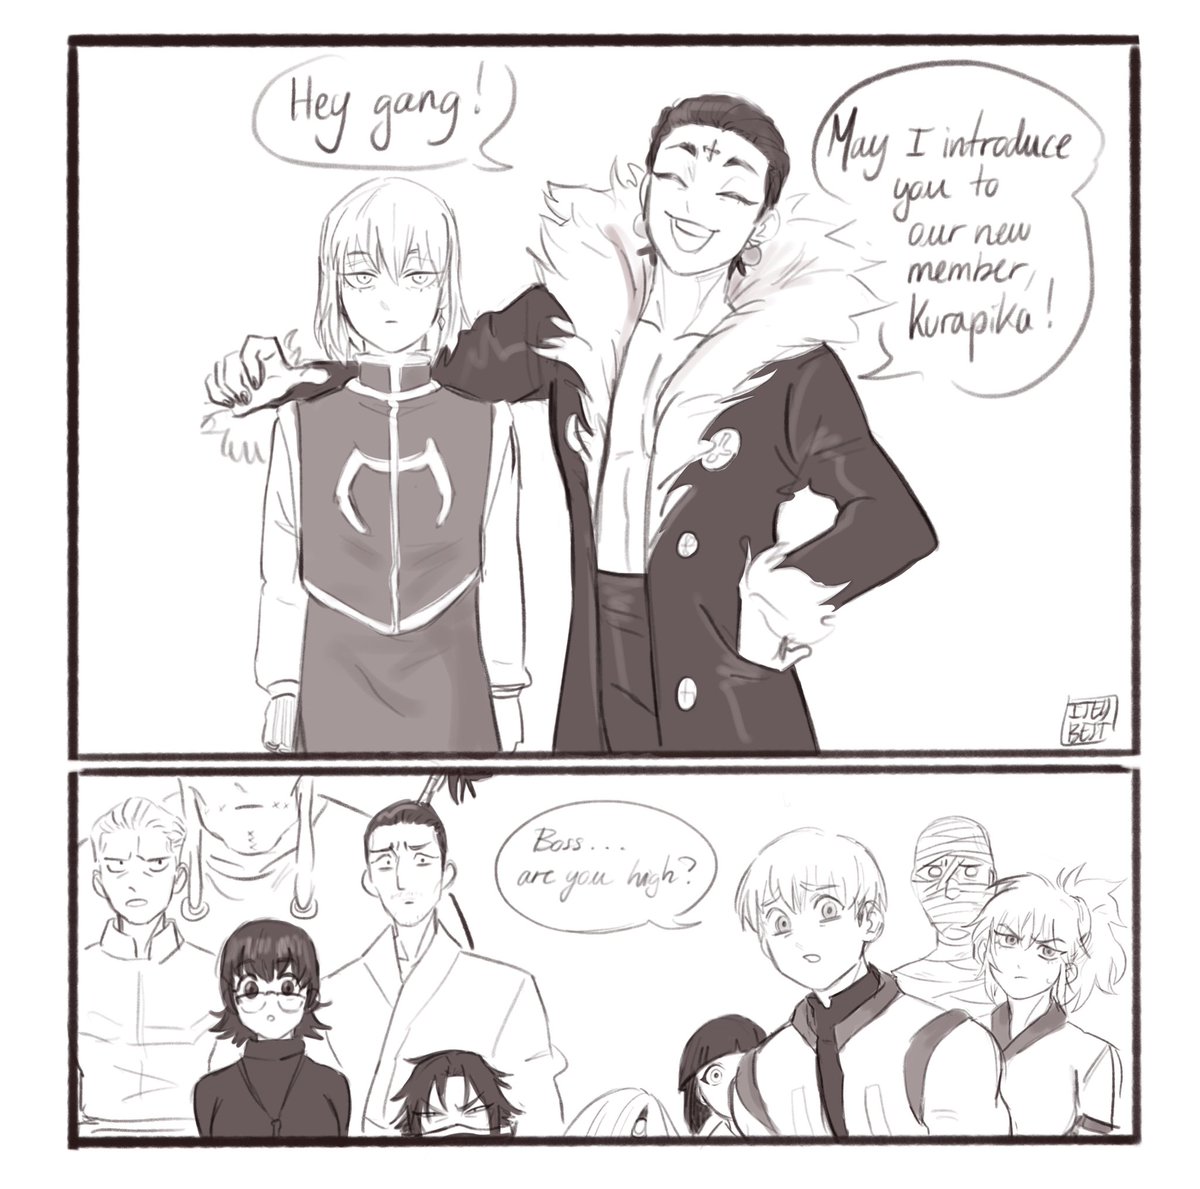 I wanted to draw a little series of comics about Kurapika joining the troupe just to mentally torture them and here is the first one. 